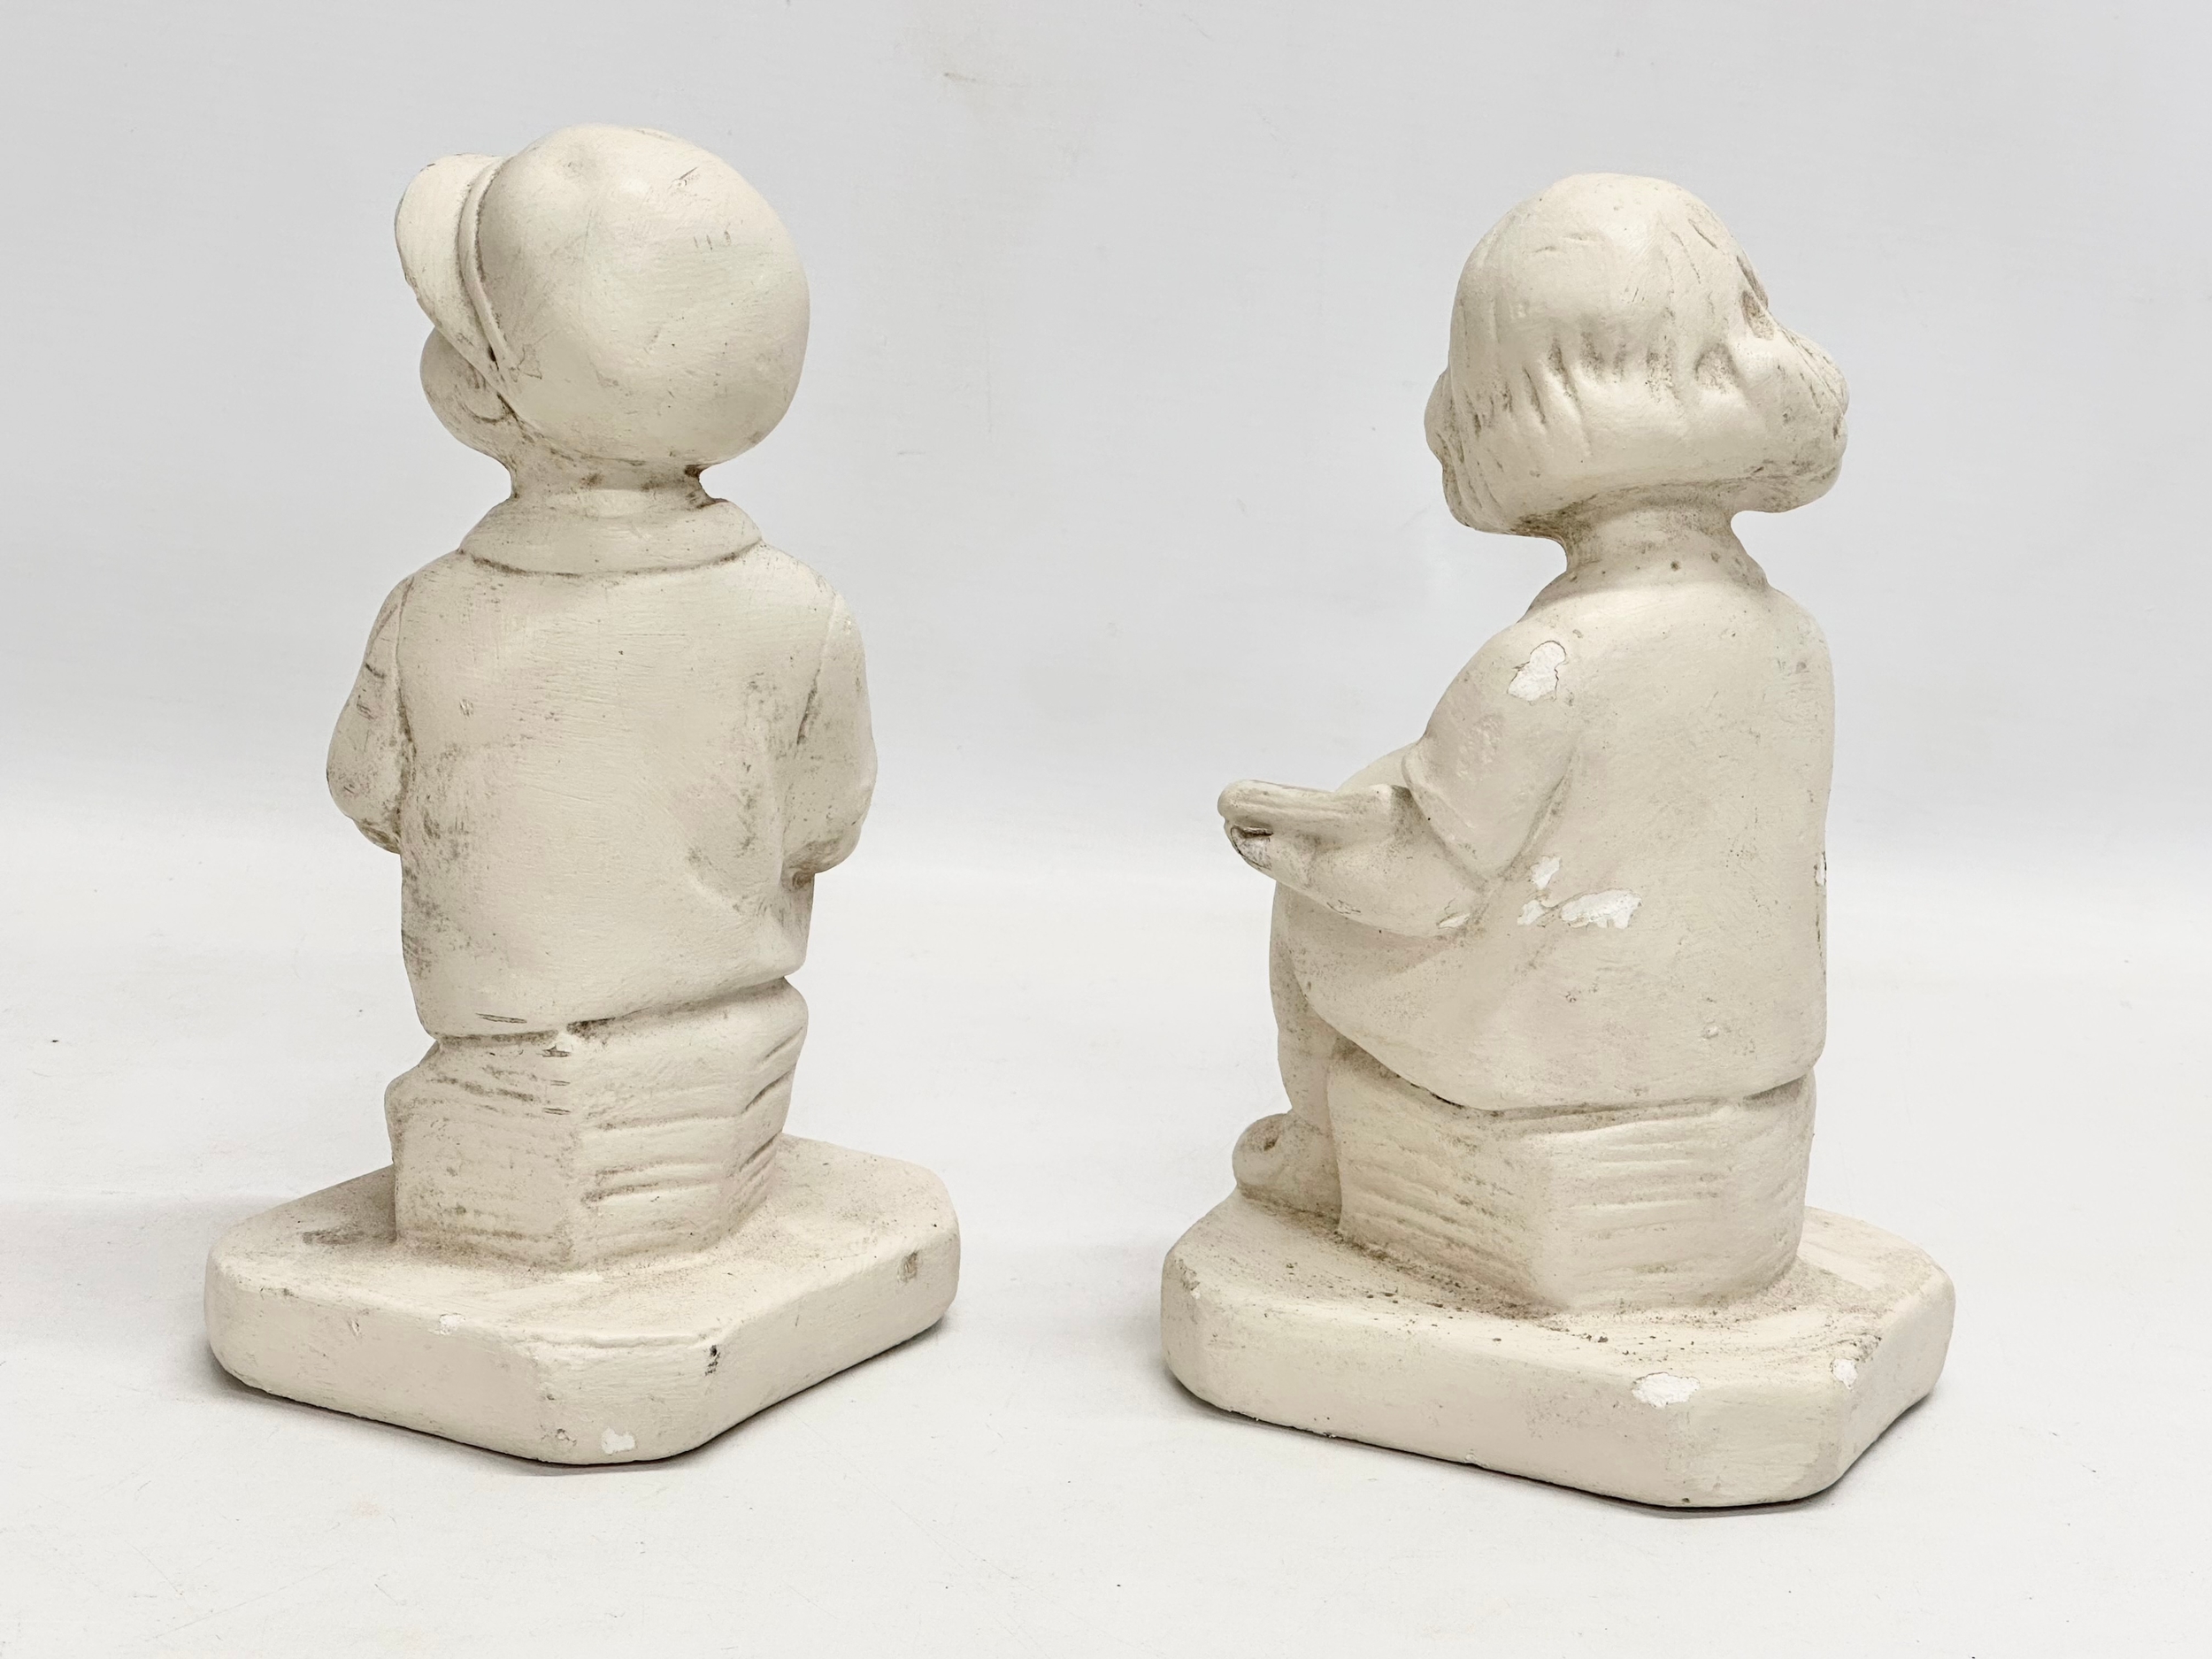 A large early 20th century ‘His First Love’ figurine, with a pair of early 20th century ‘Thought & - Image 7 of 8